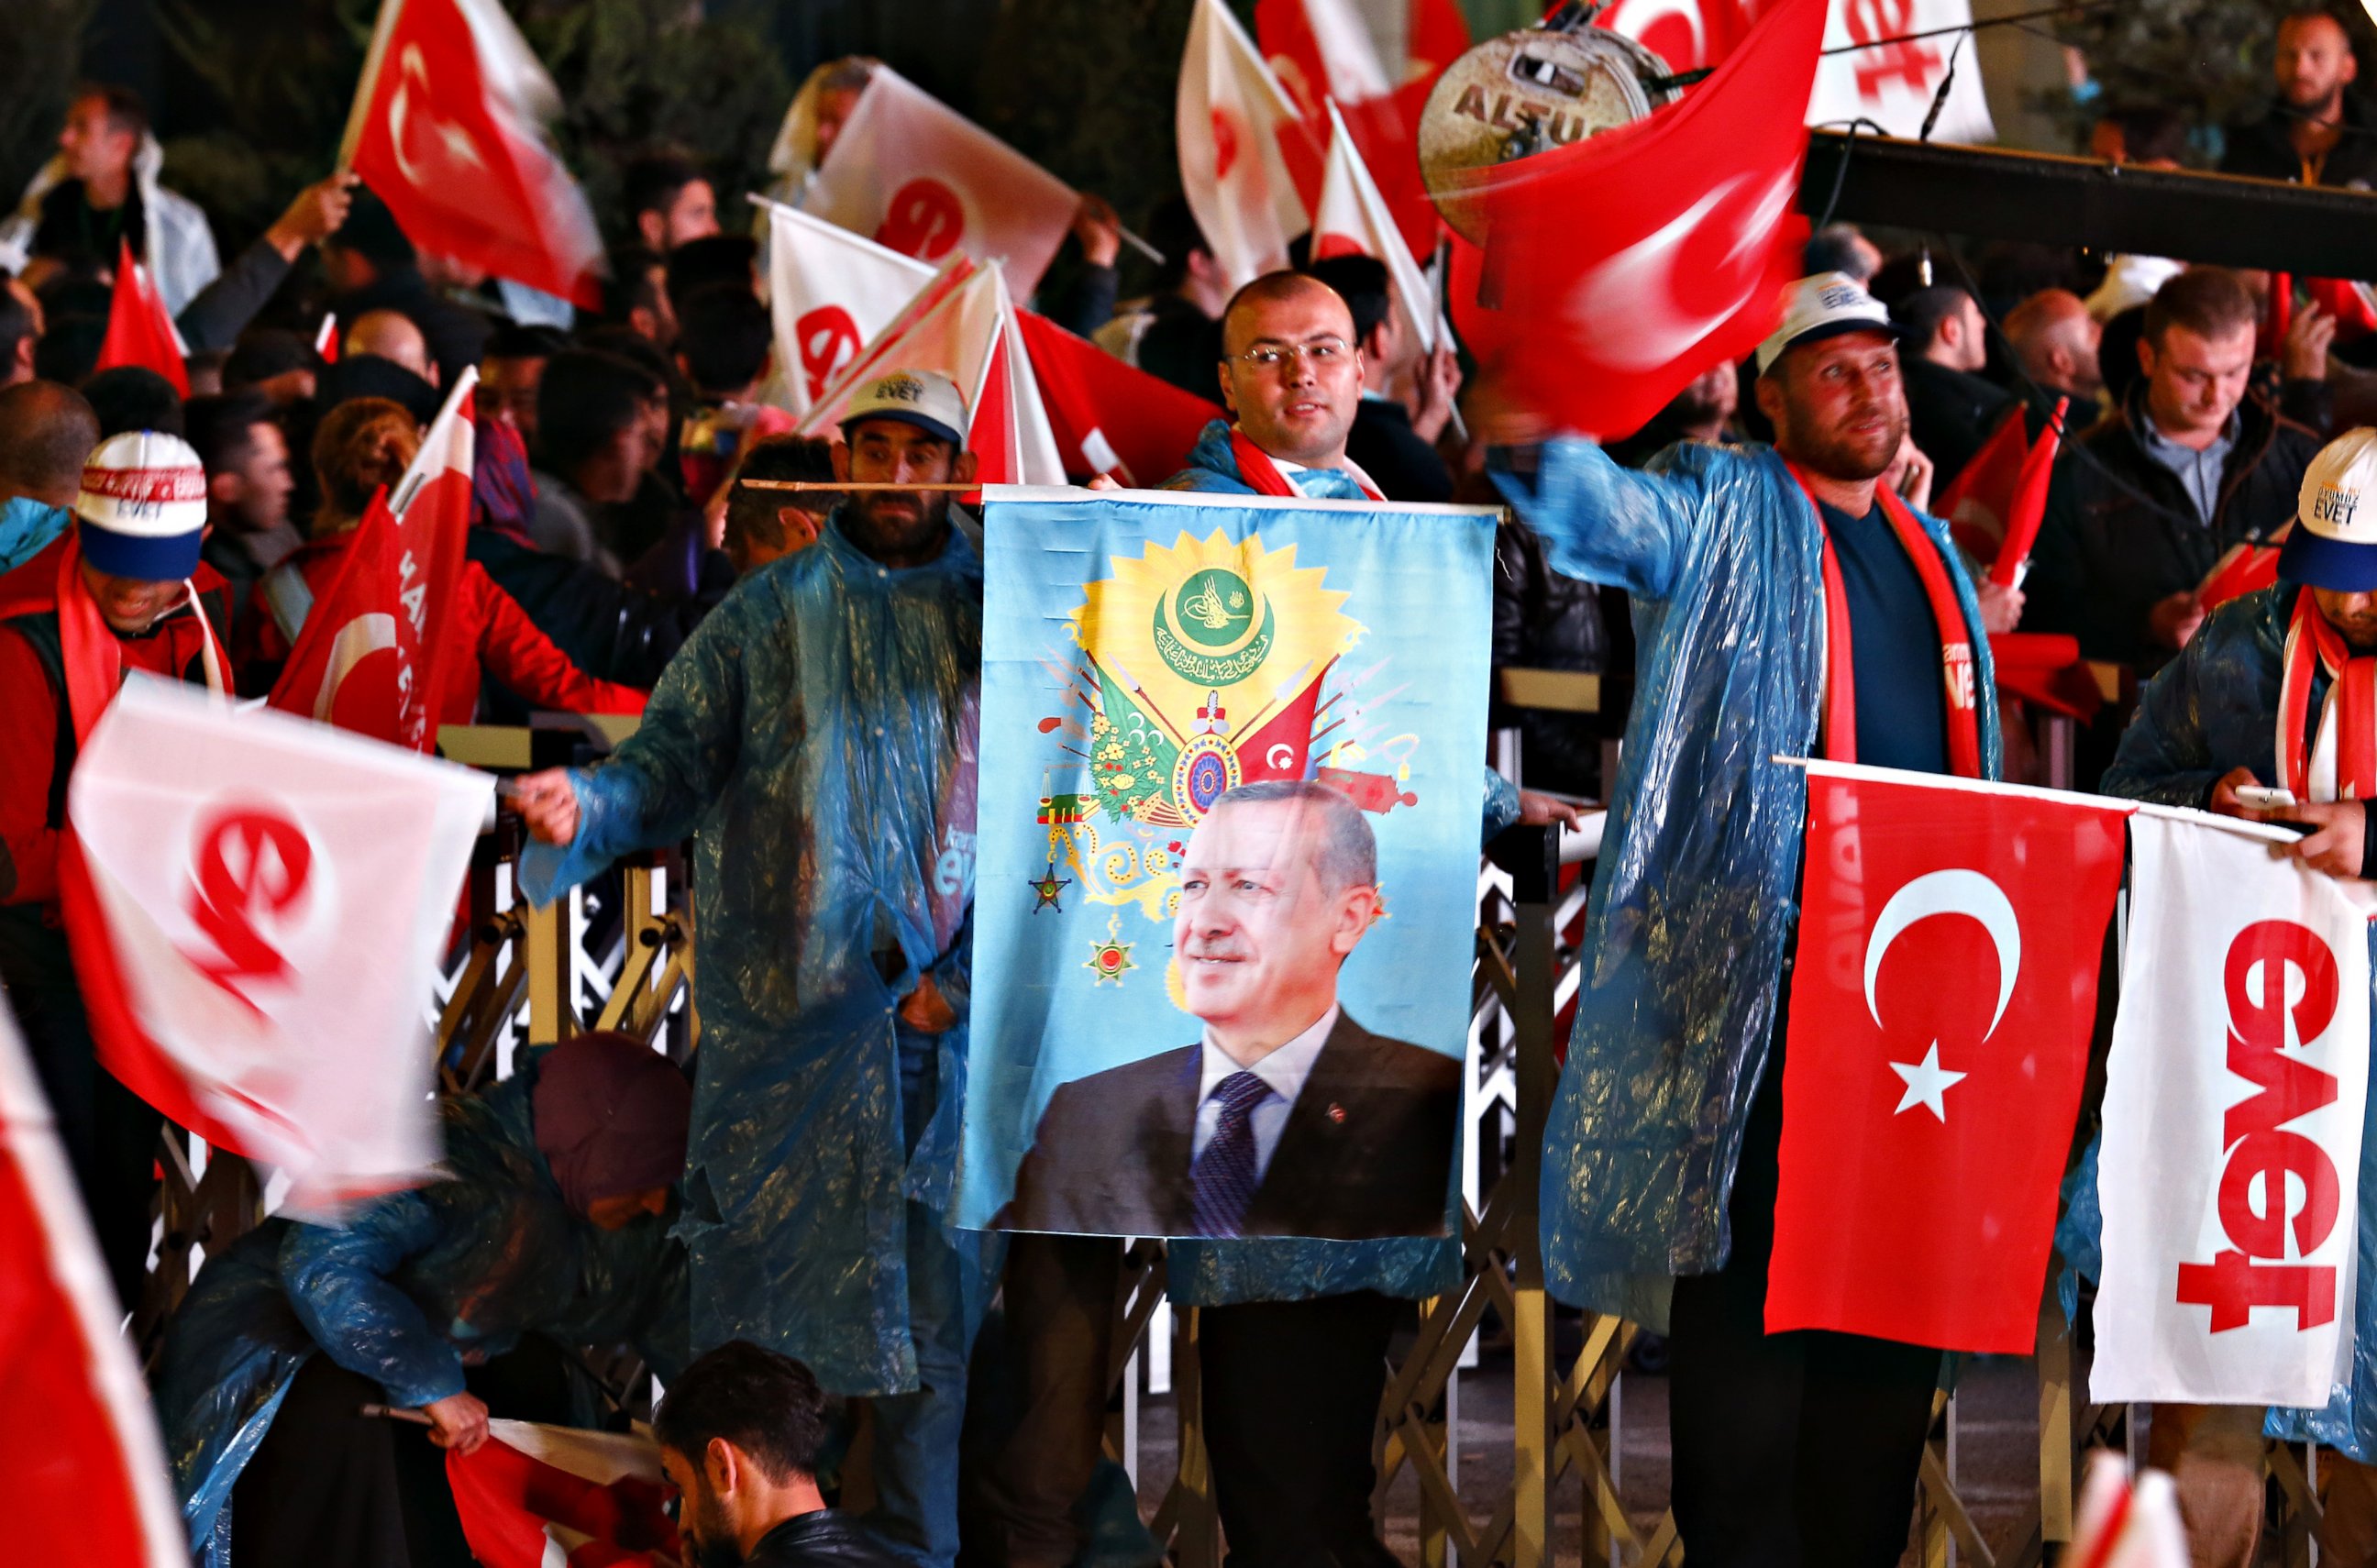 PHOTO: Supporters of the conservative AK party, founded by Turkish President Recep Tayyip Erdogan, celebrate victory in the referendum vote to amend the country's constitution, April 16, 2017, in Ankara, Turkey. 